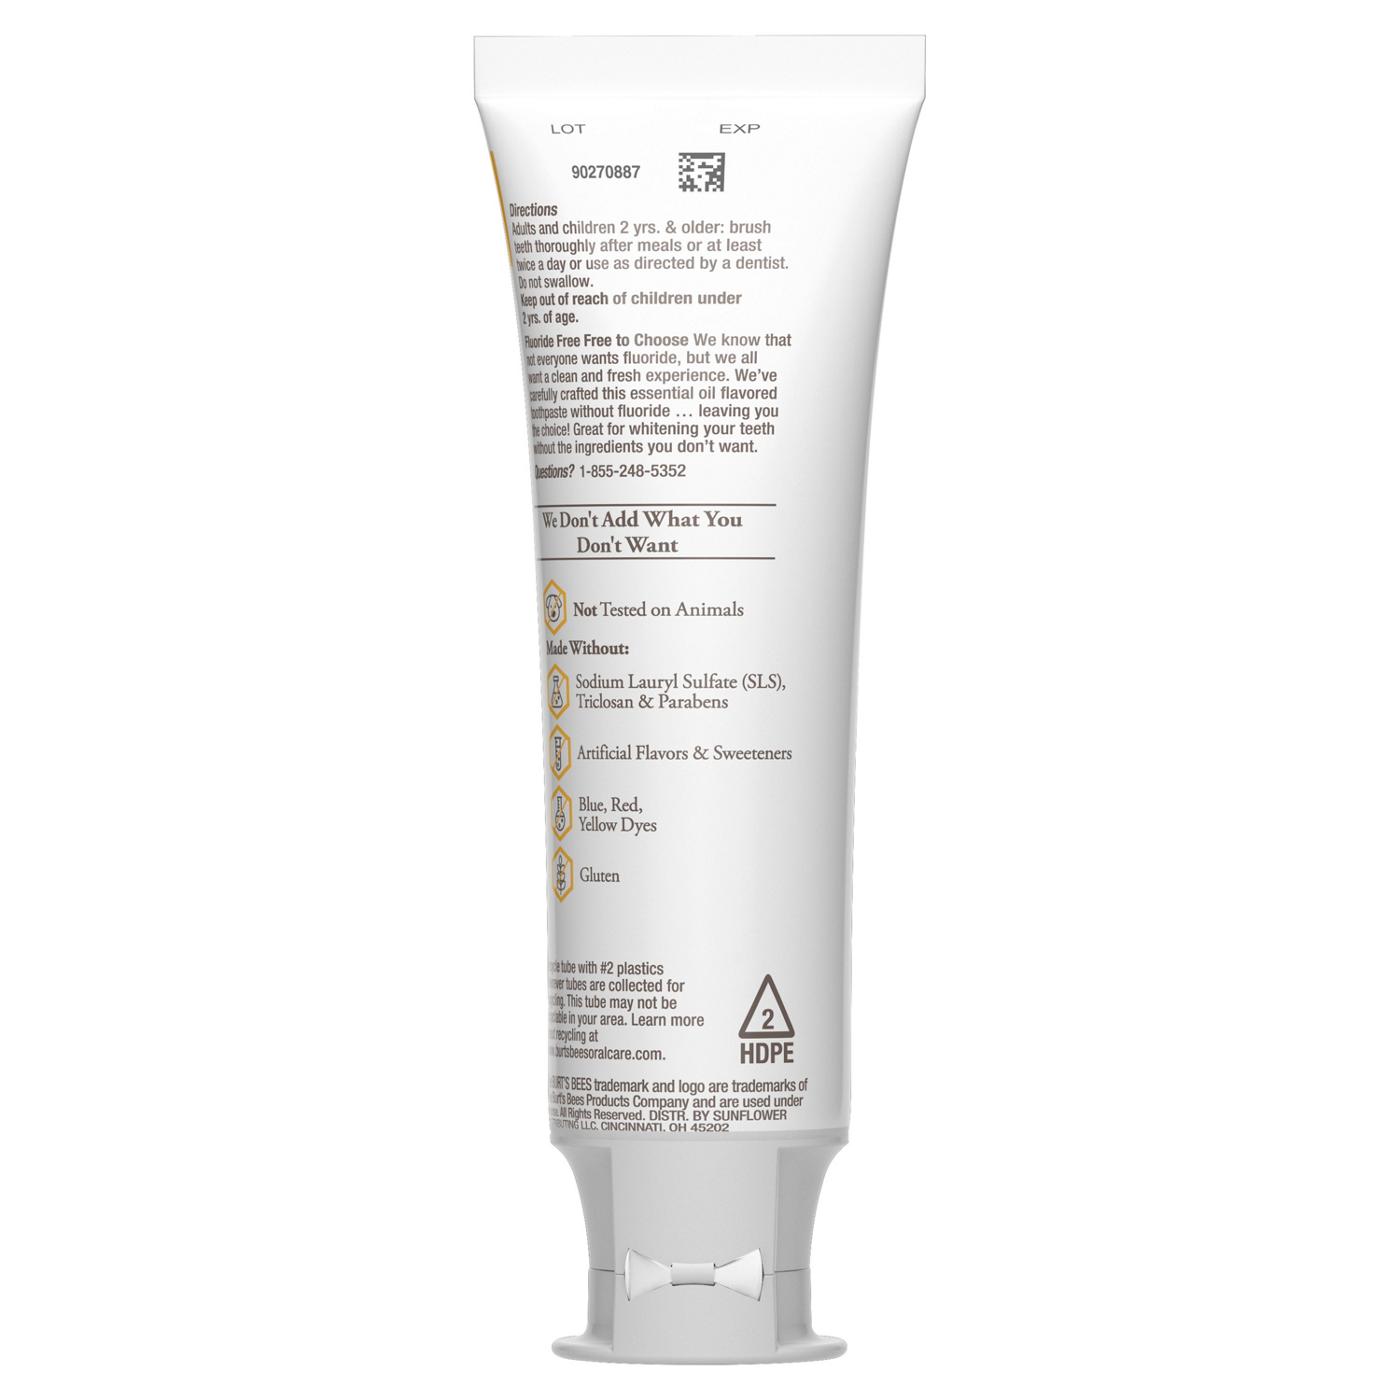 Burt's Bees Purely White Fluoride-Free Toothpaste - Zen Peppermint; image 4 of 8